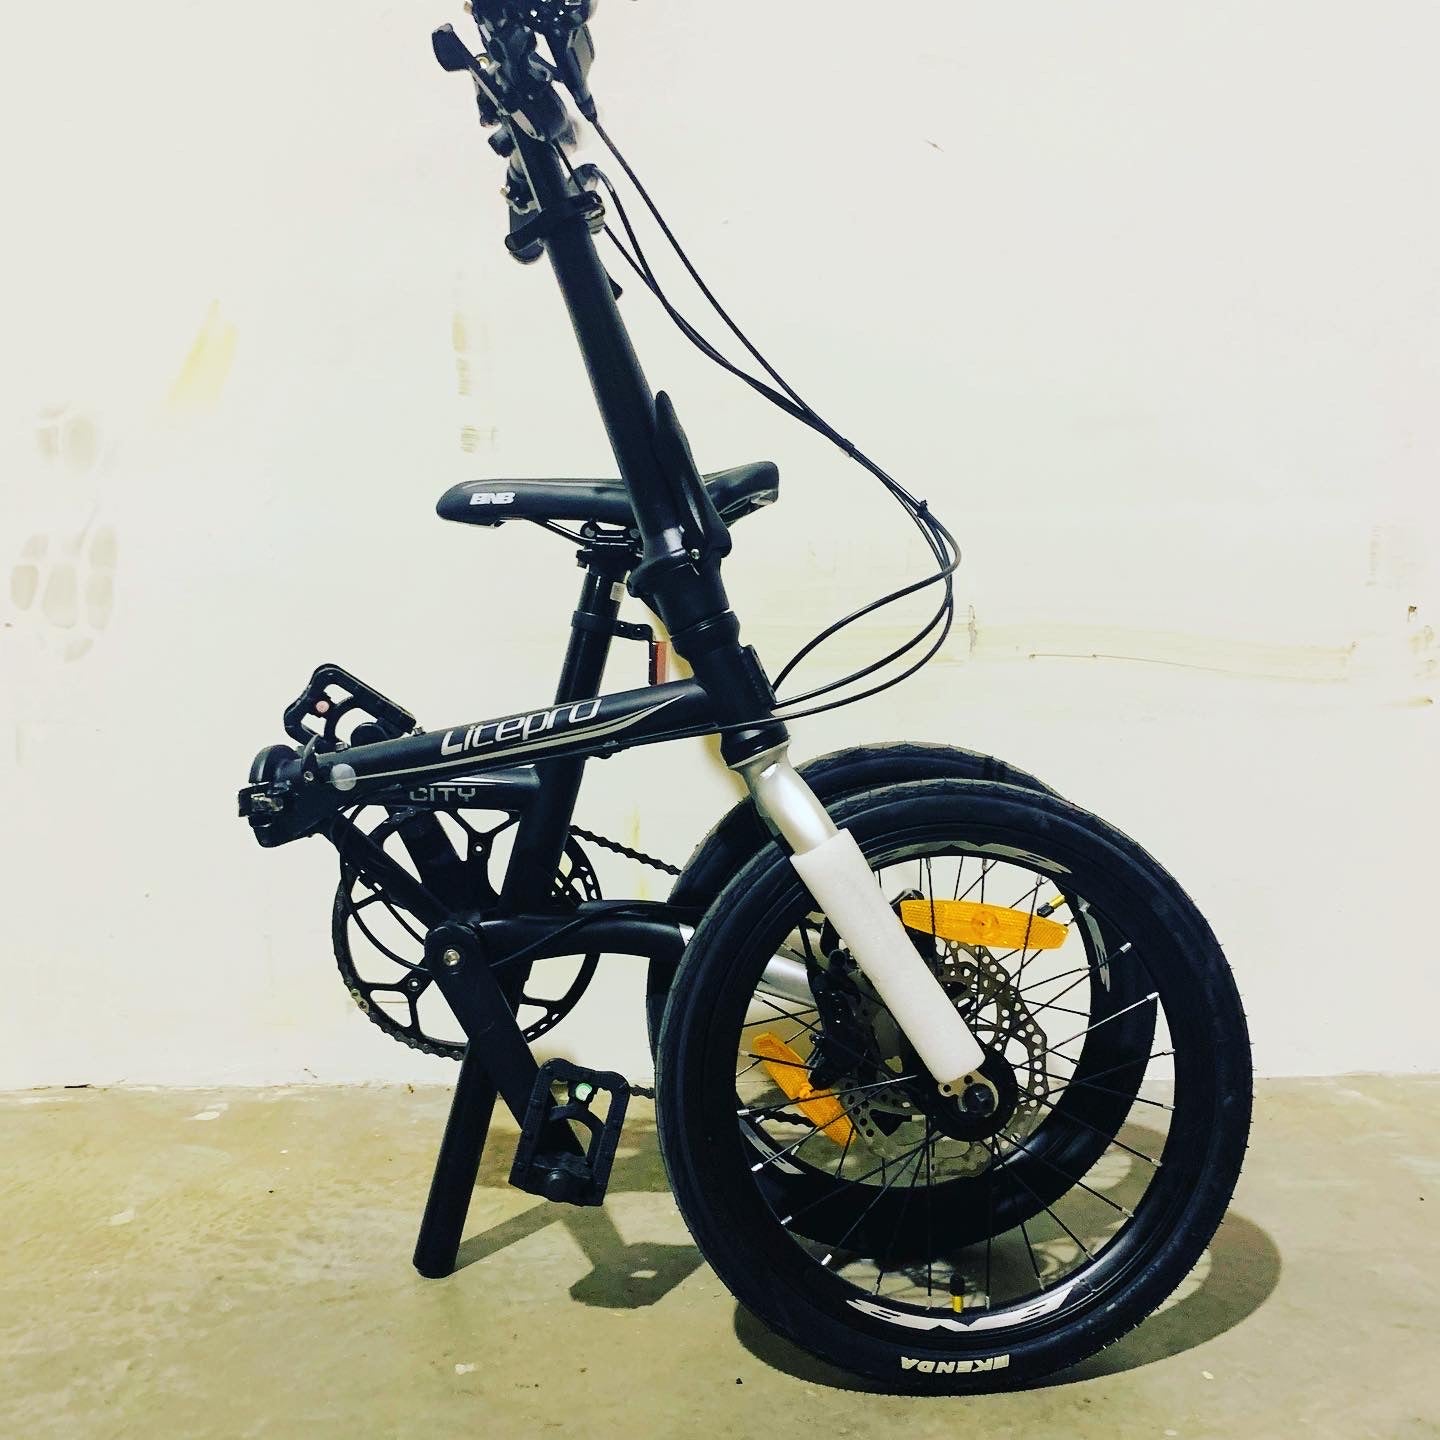 16 INCH LITEPRO FOLDING BICYCLE  9-SPEED DISC BRAKE ( WEIGHS ONLY 11.5 KG )(Free Installation With Purchase)